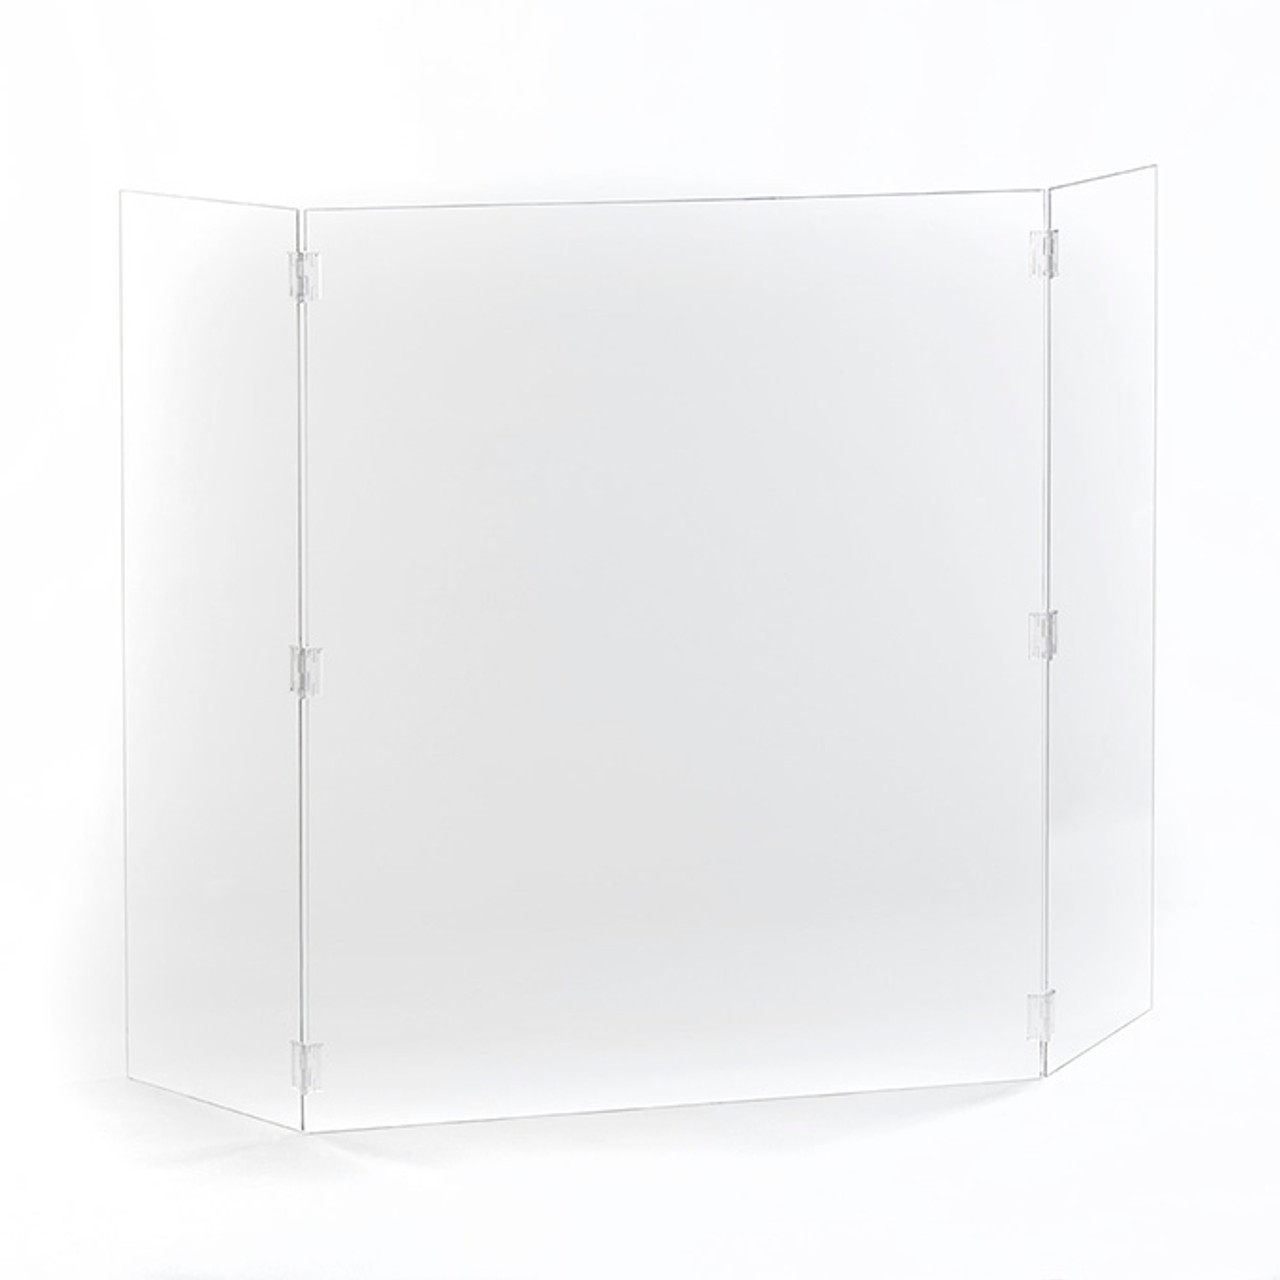 Hinged Free-Standing Protective Clear Acrylic Divider Shield - 28